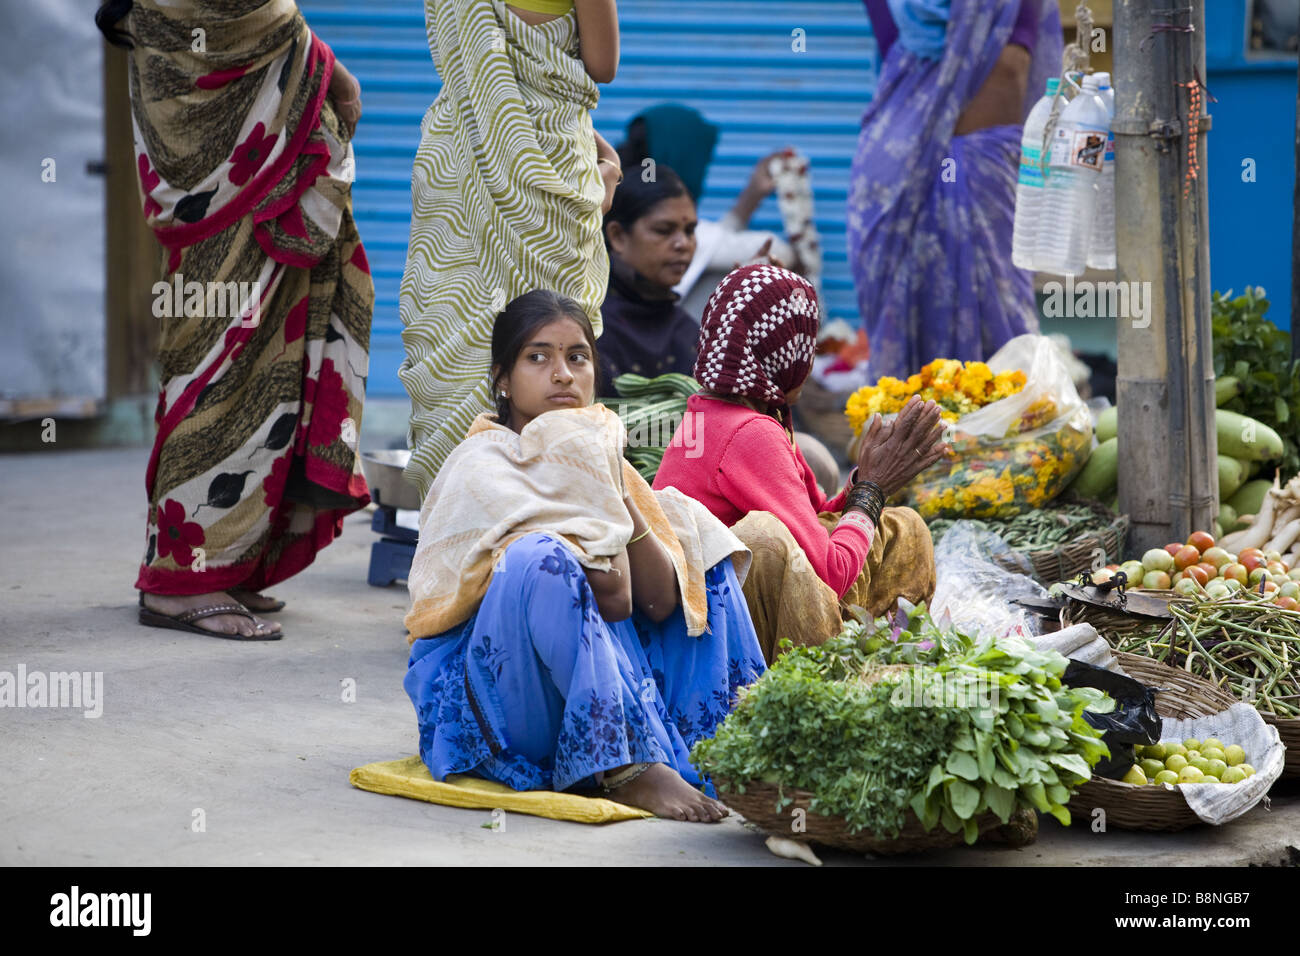 Indian women selling goods Stock Photo